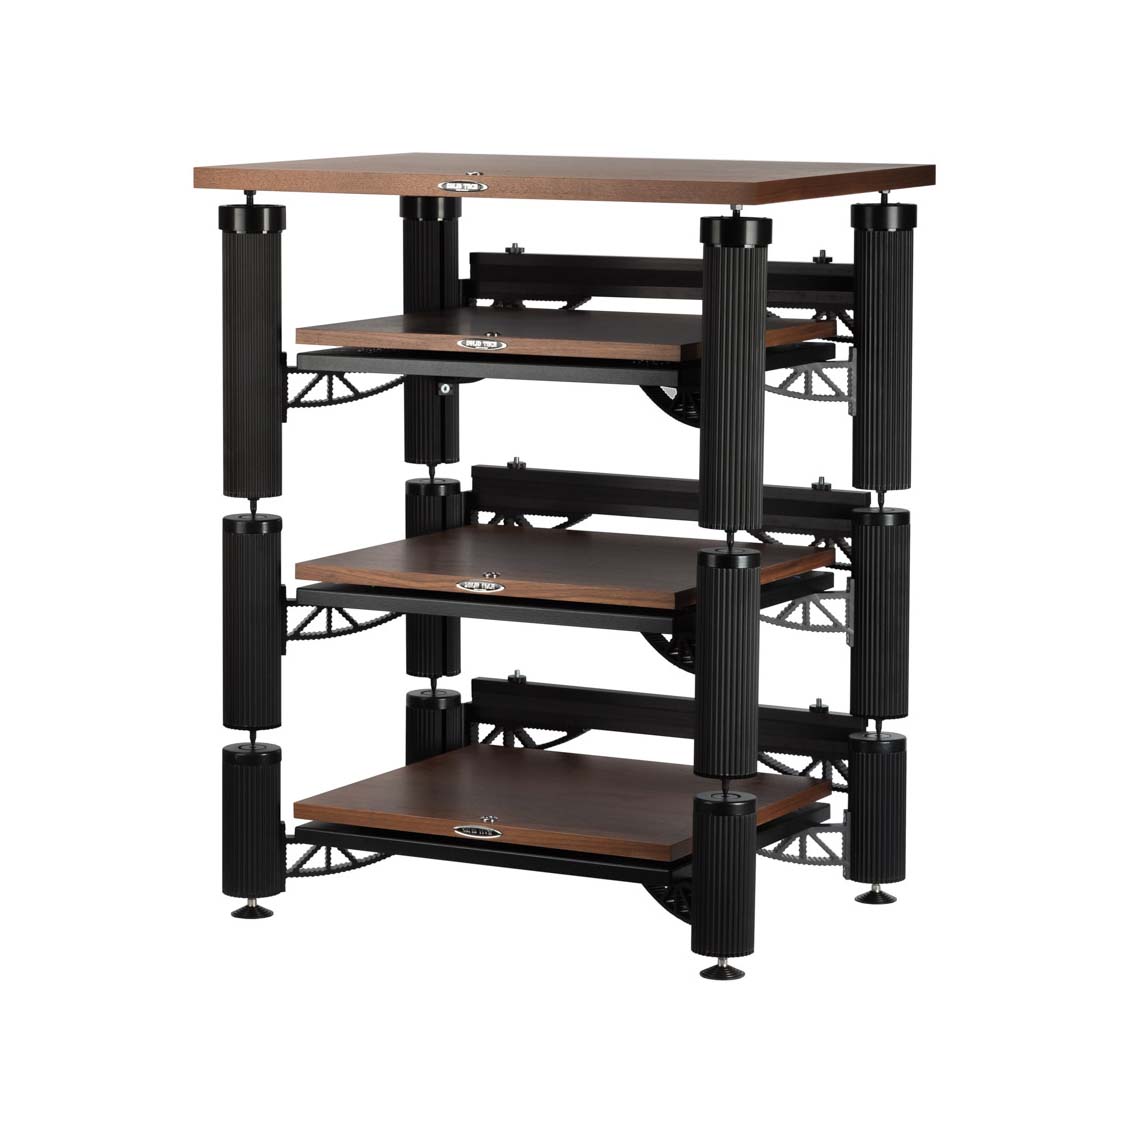 3 isolation shelf-kit design with top shelf and cable carriers in black/walnut-image